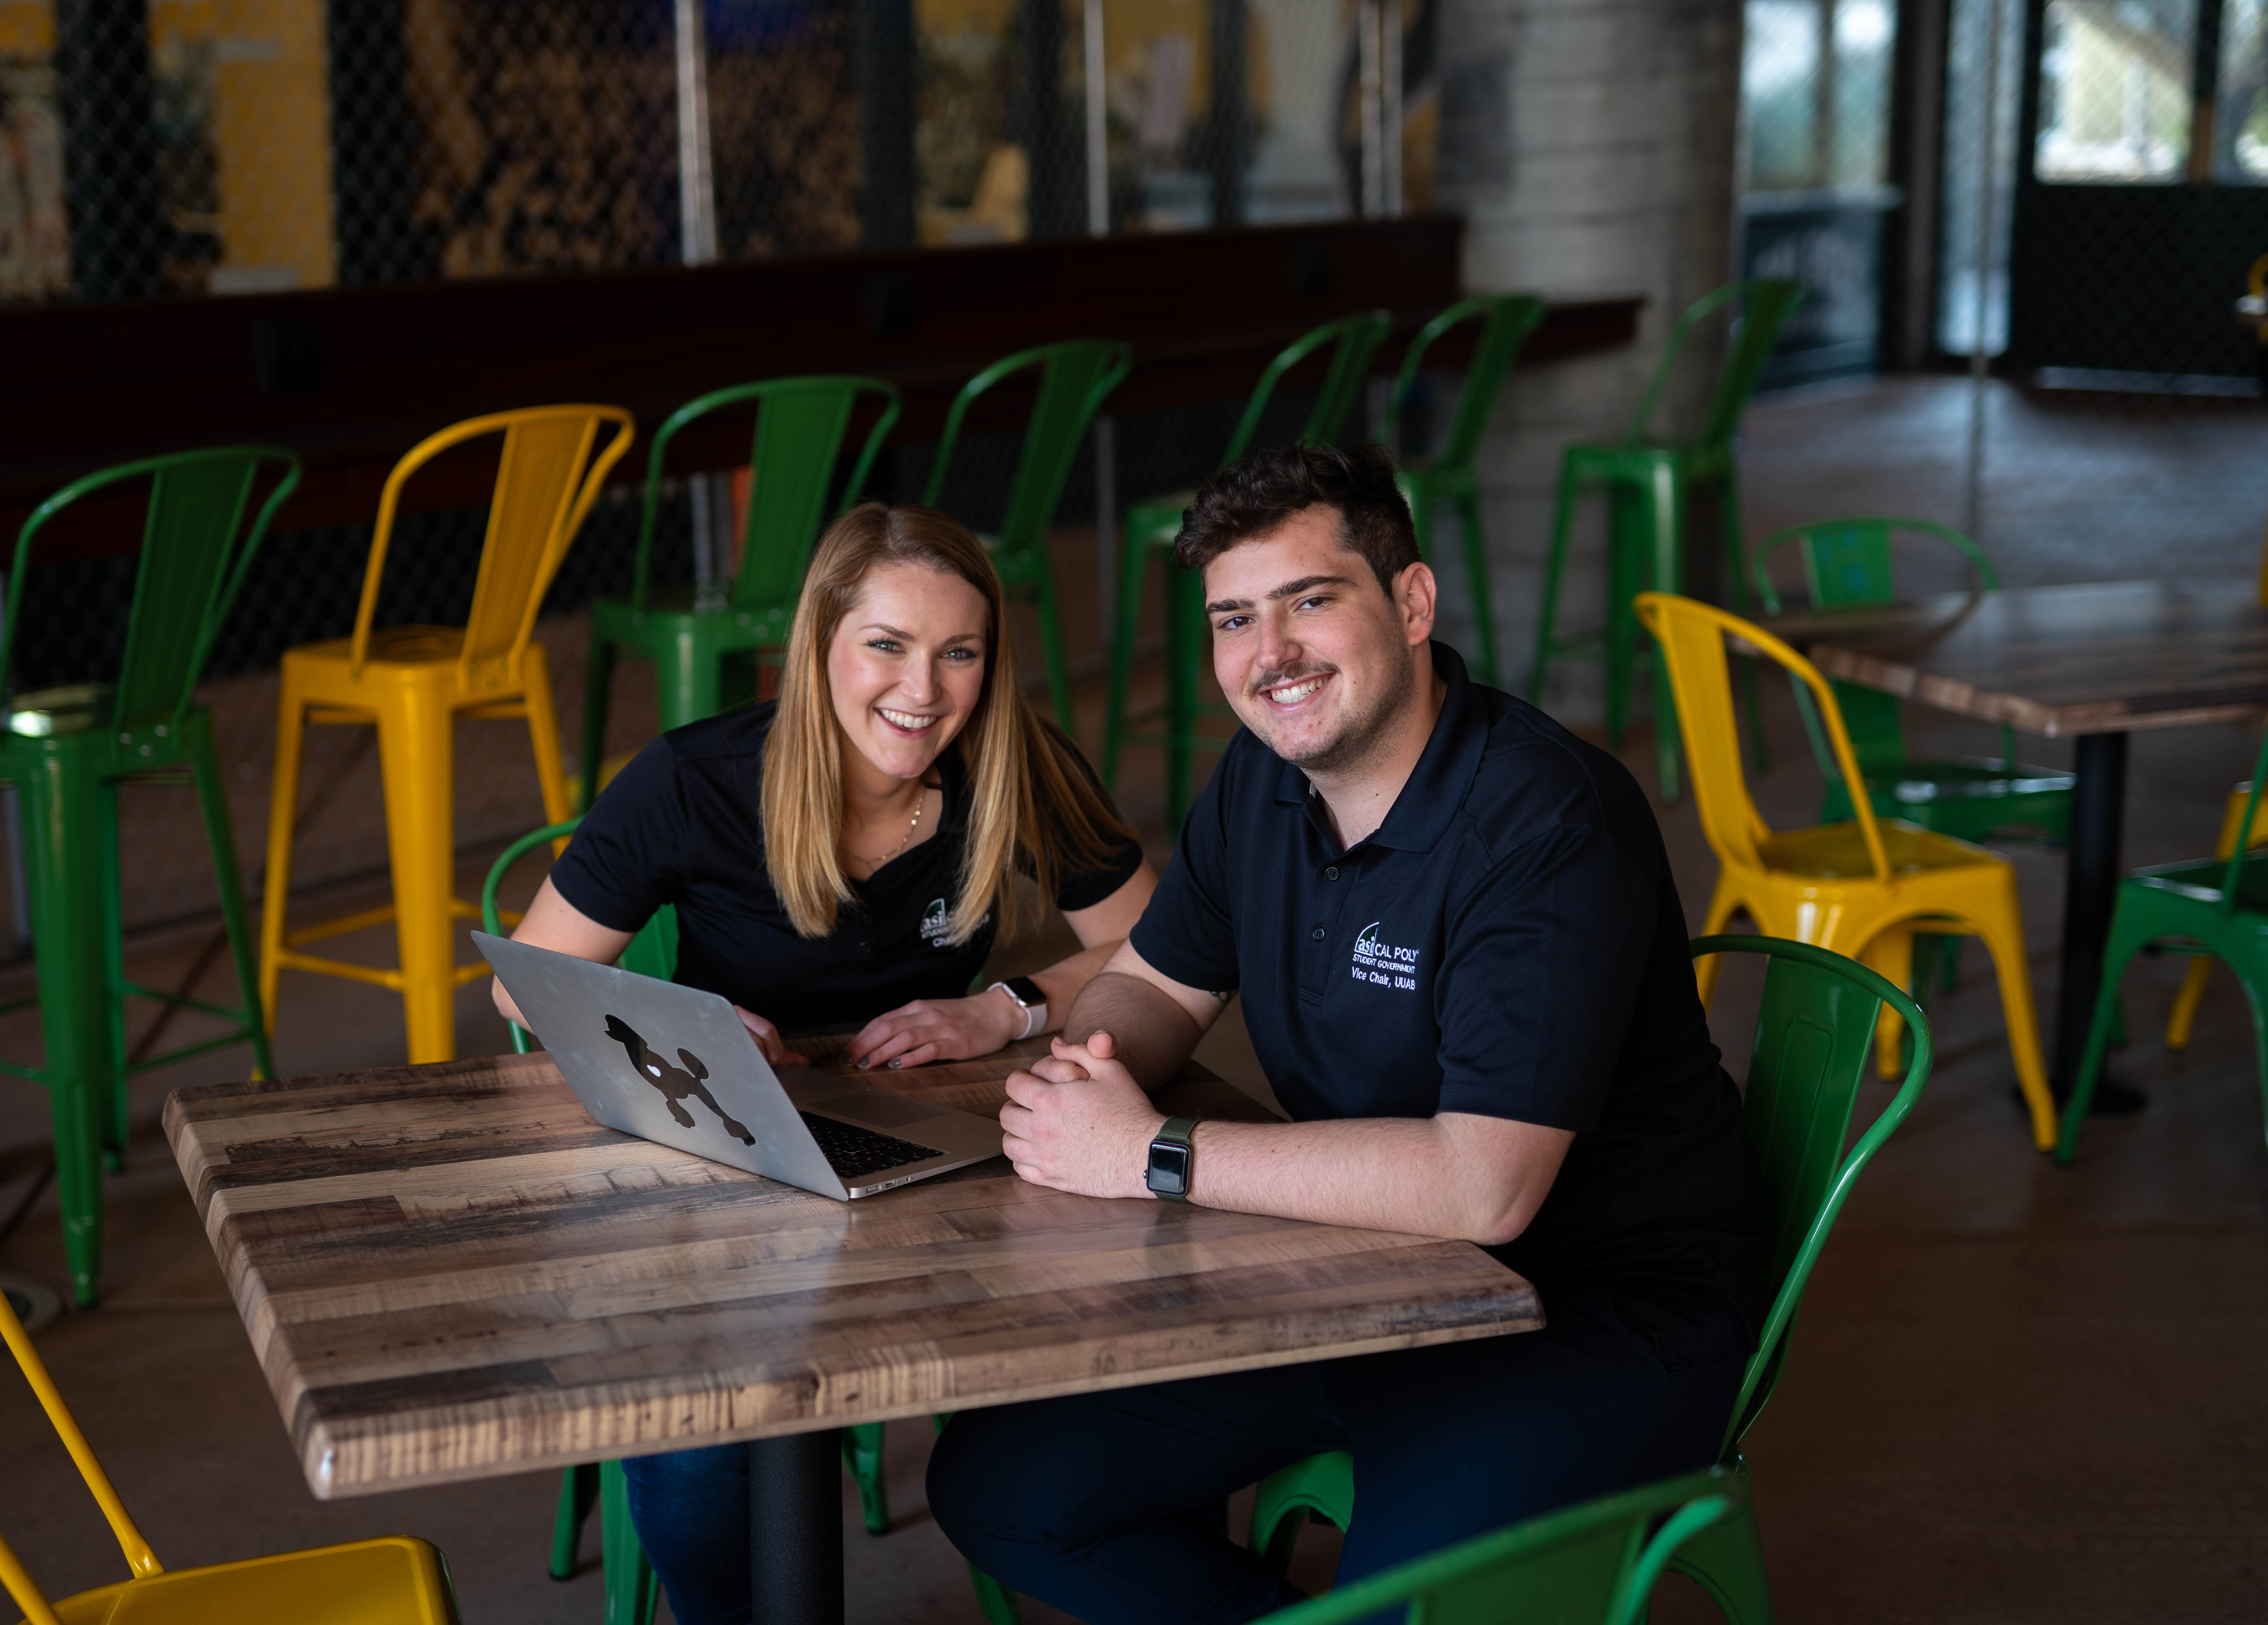 Elizabeth Roseman and Will Sambar sit smiling in green chairs at a wood table with a laptop on it 